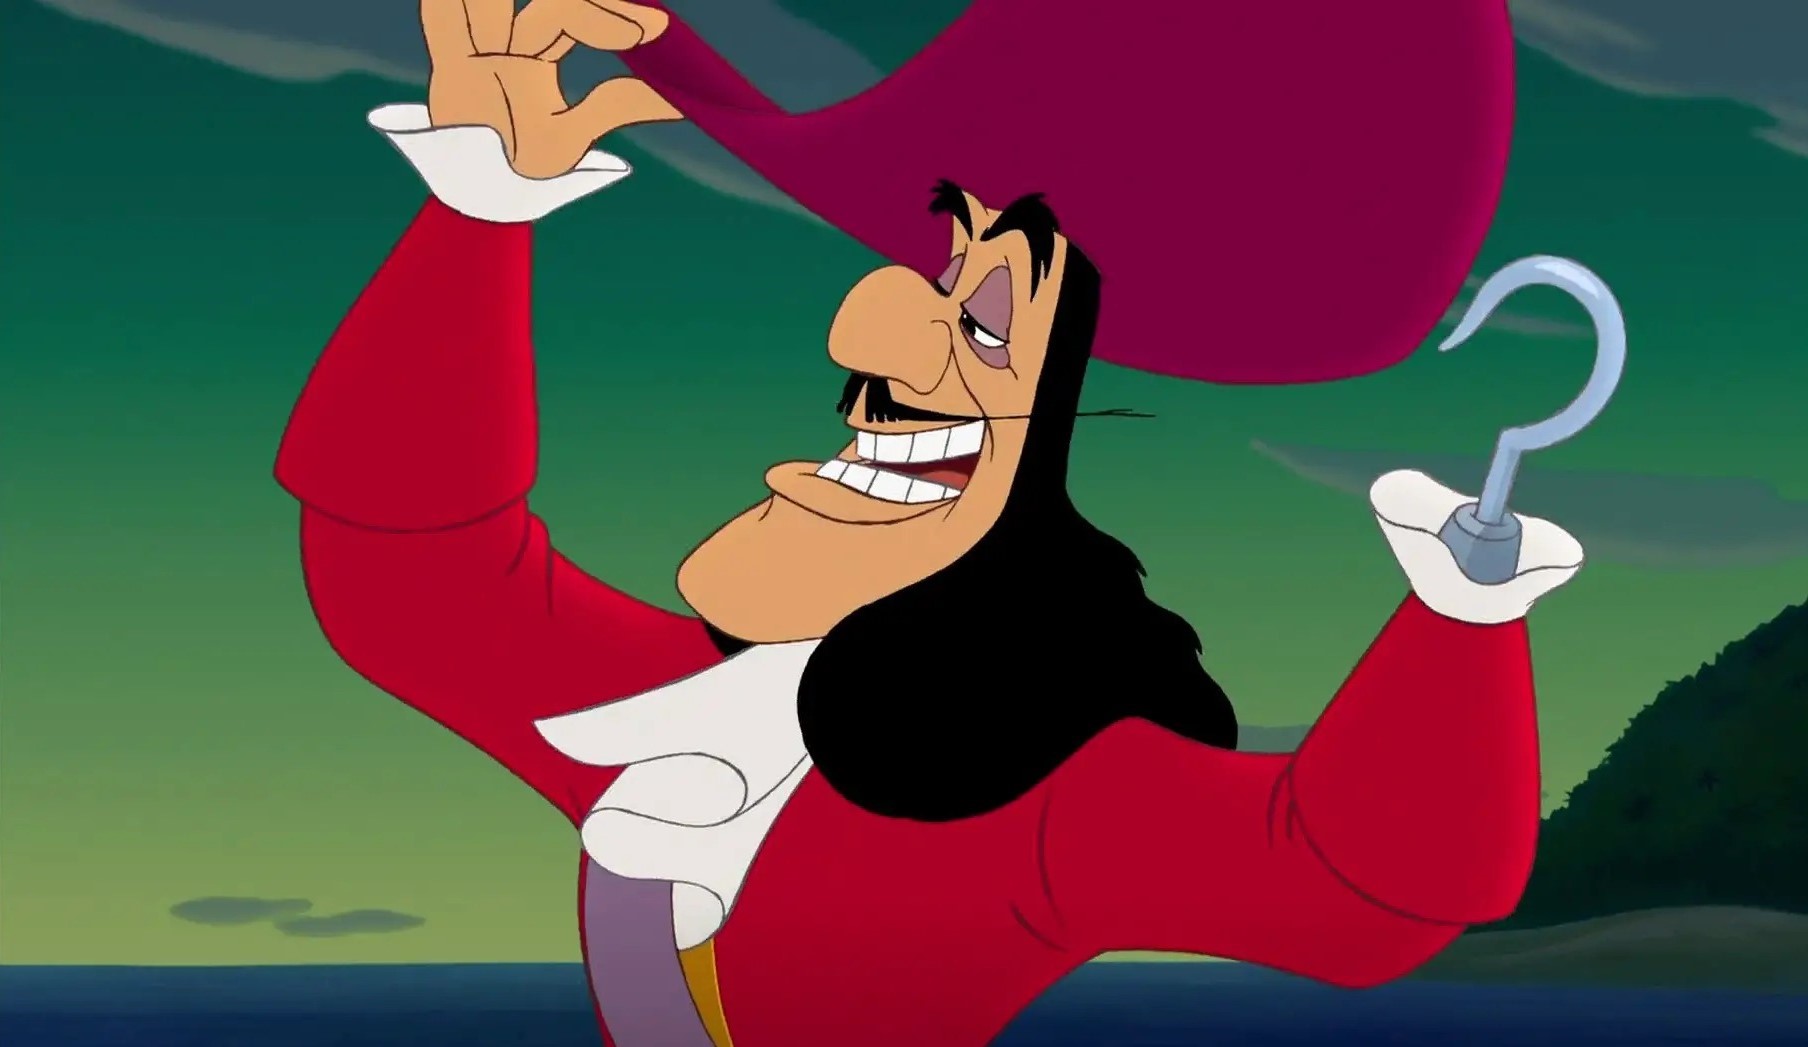 Captain Hook, Captain of the Jolly Roger